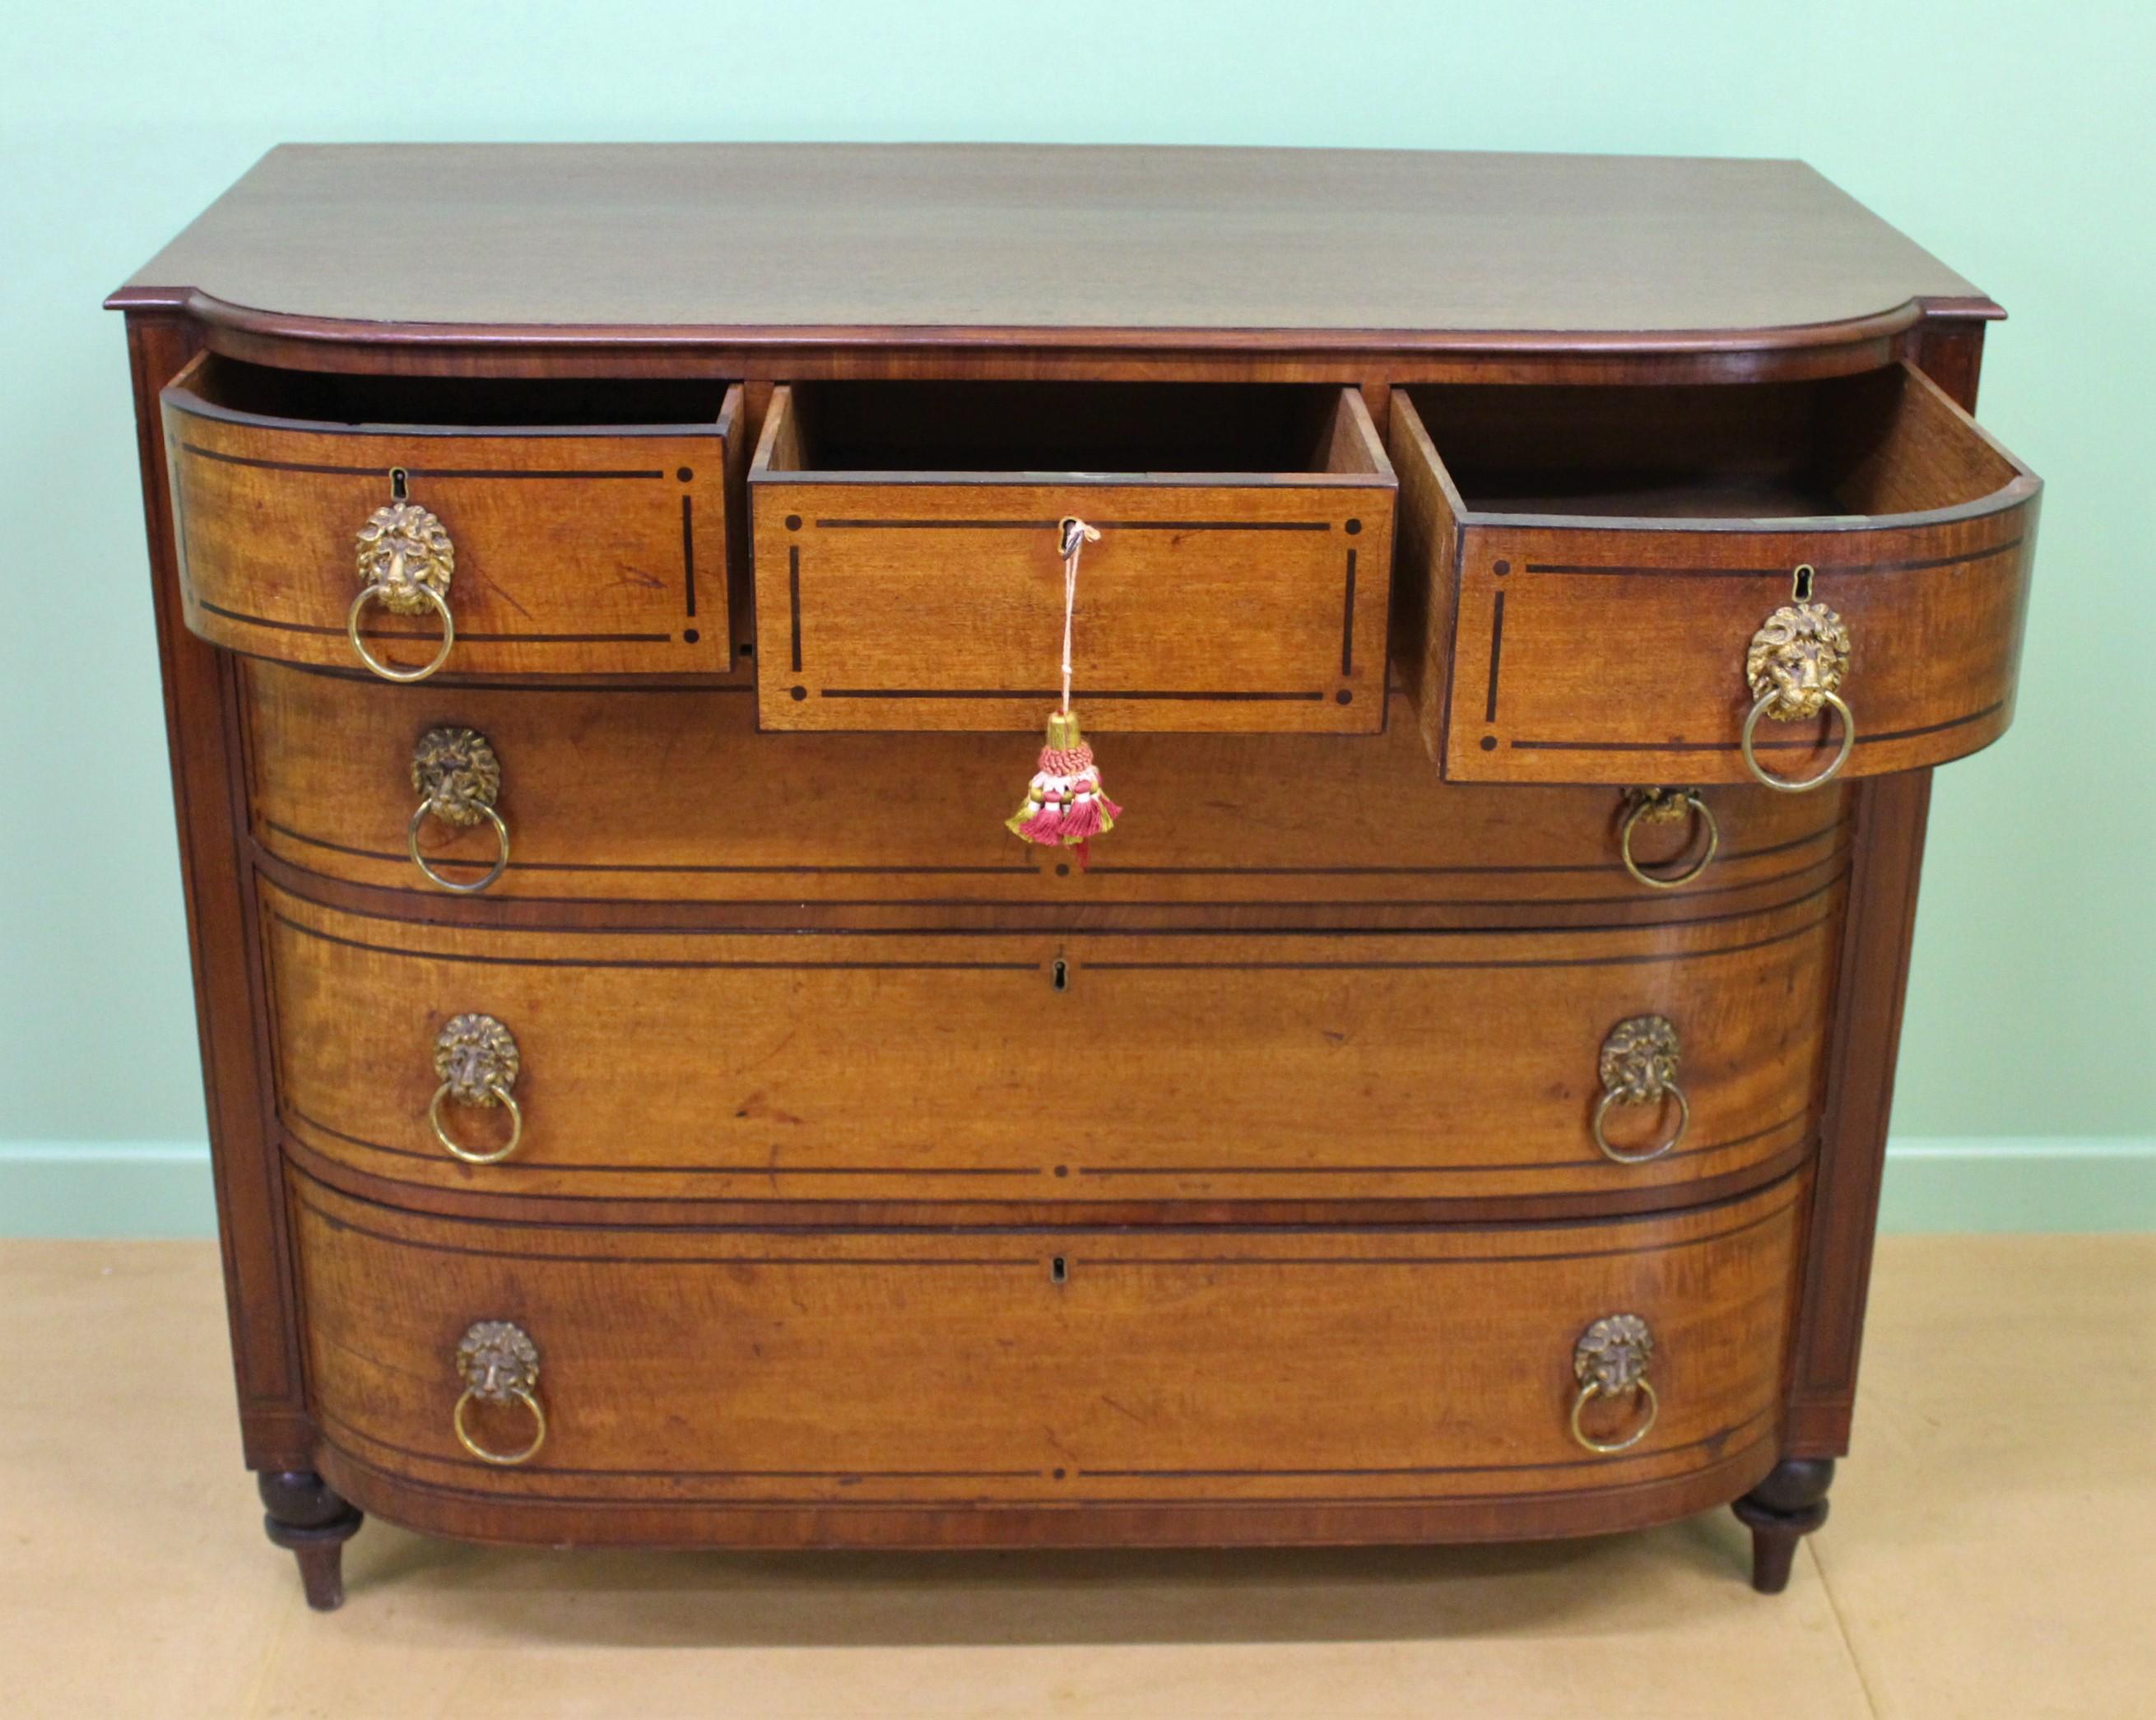 Ebony Inlaid Regency Mahogany Chest of Drawers For Sale 10